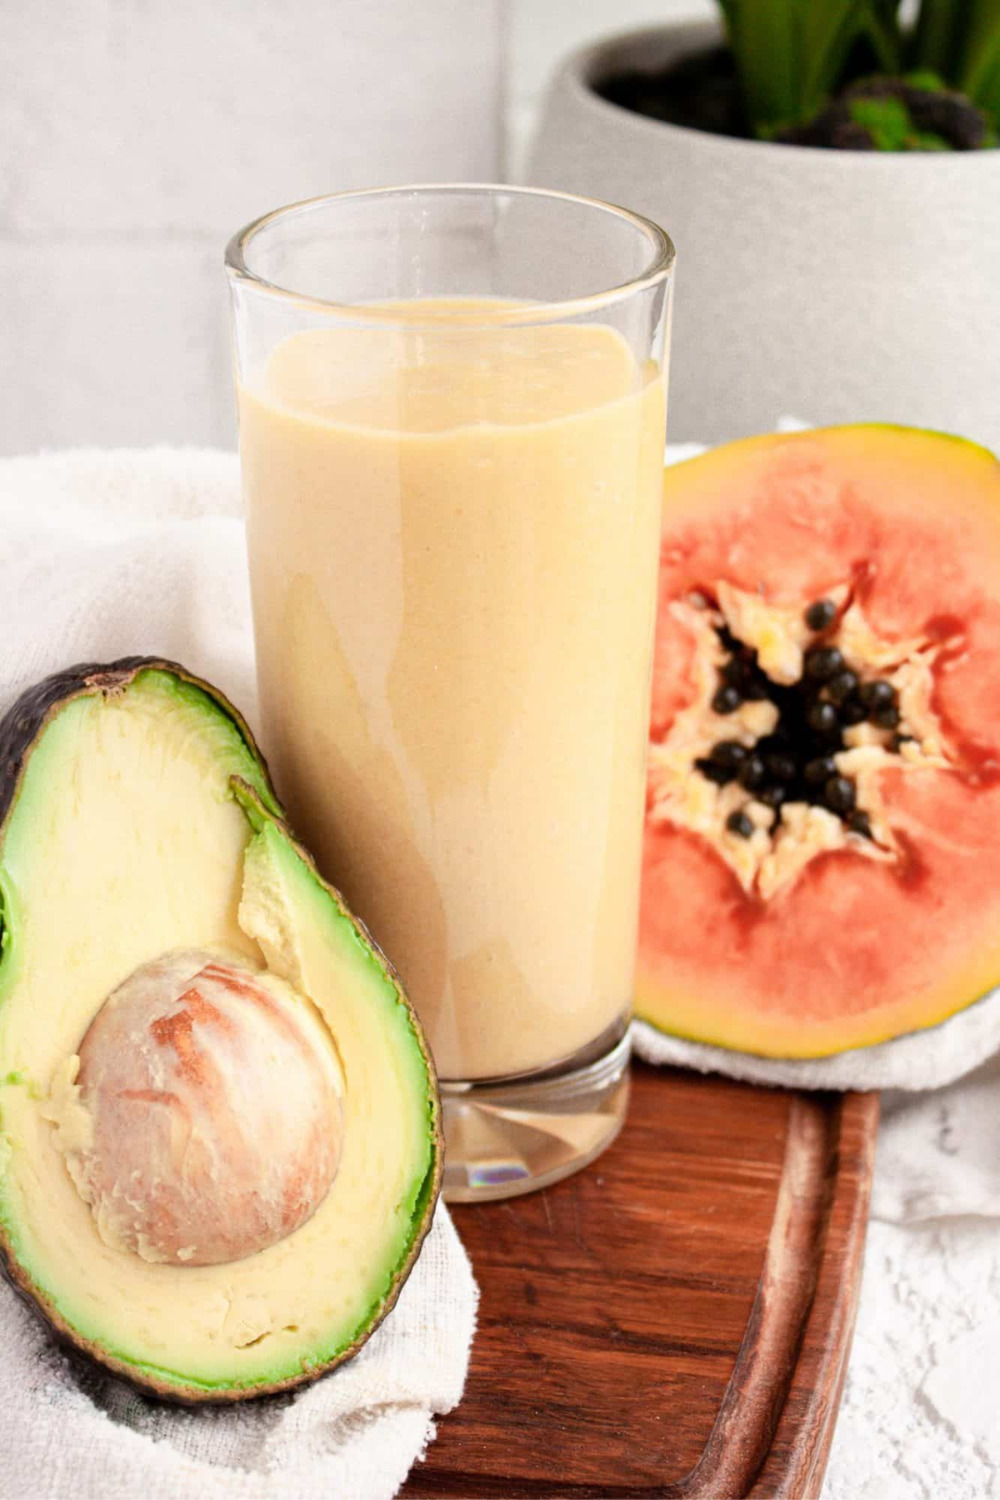 healthy breakfast smoothie recipes